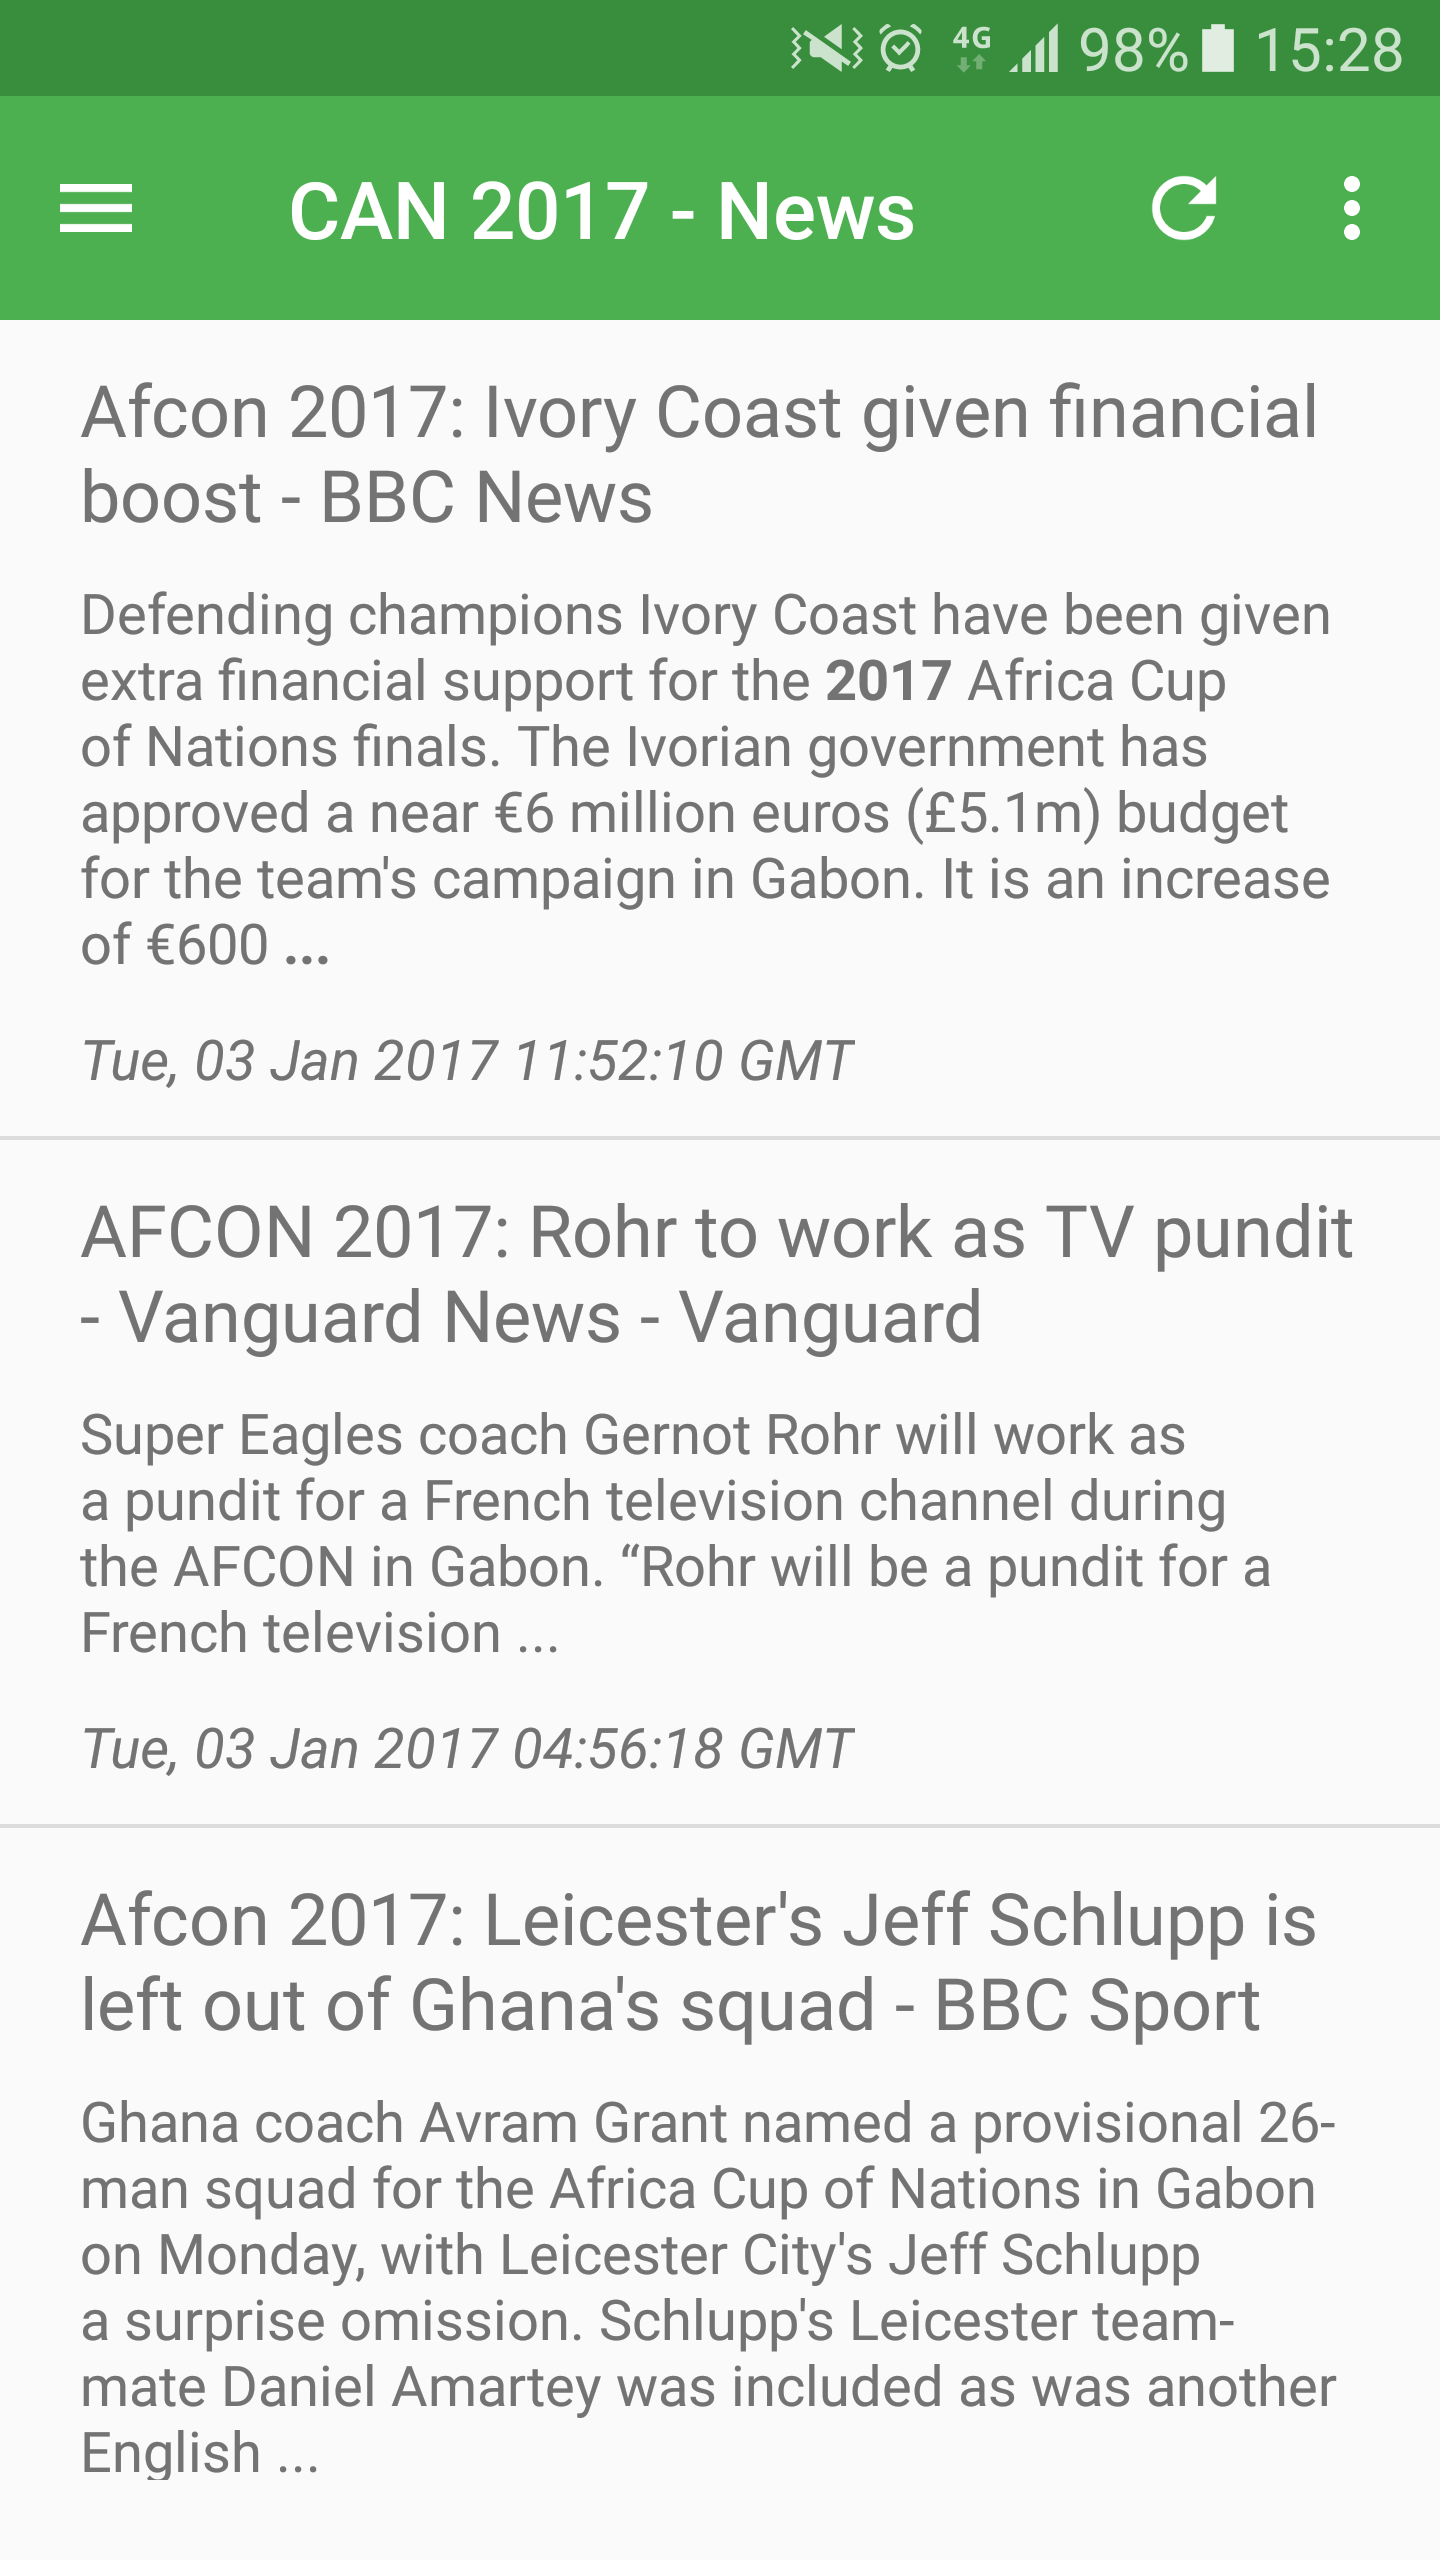 Android application App for AFCON Football 2017 screenshort